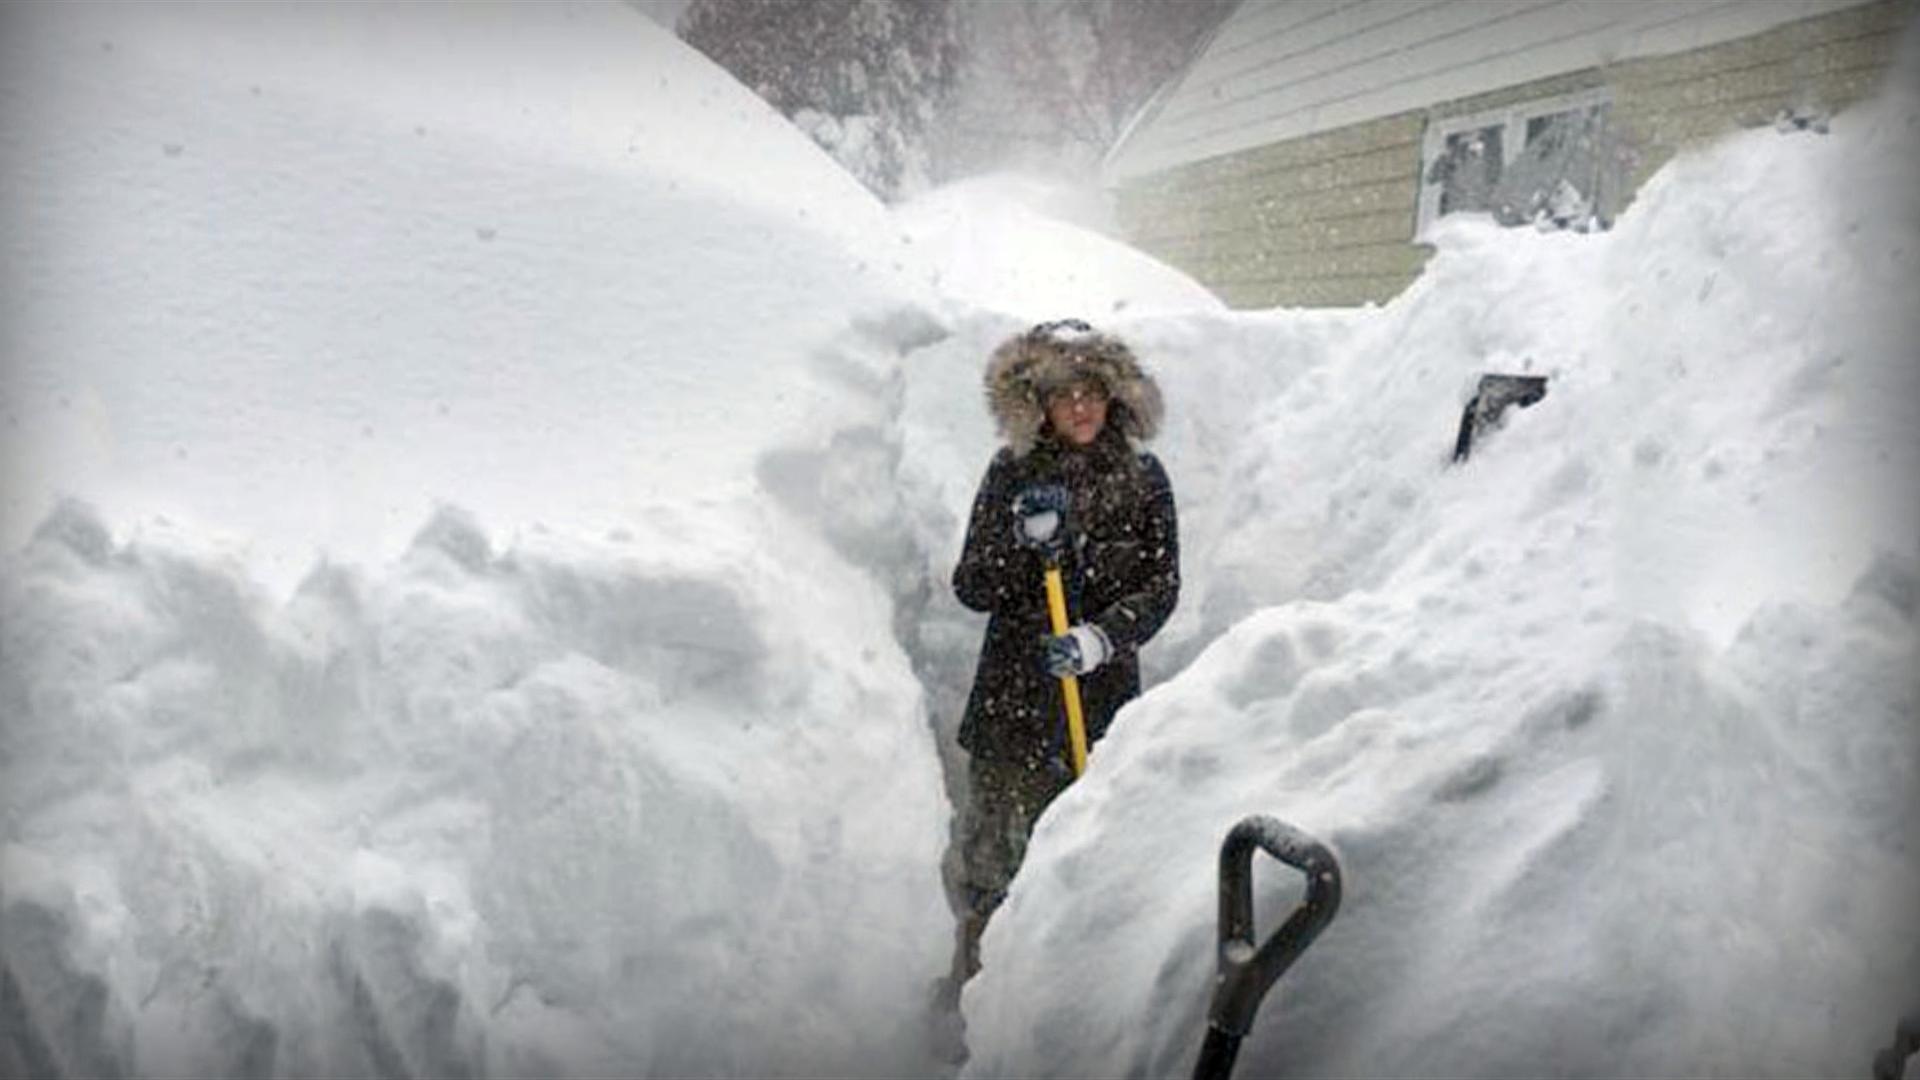 Deadly storm dumps nearly 6 feet of snow on upstate NY, with more